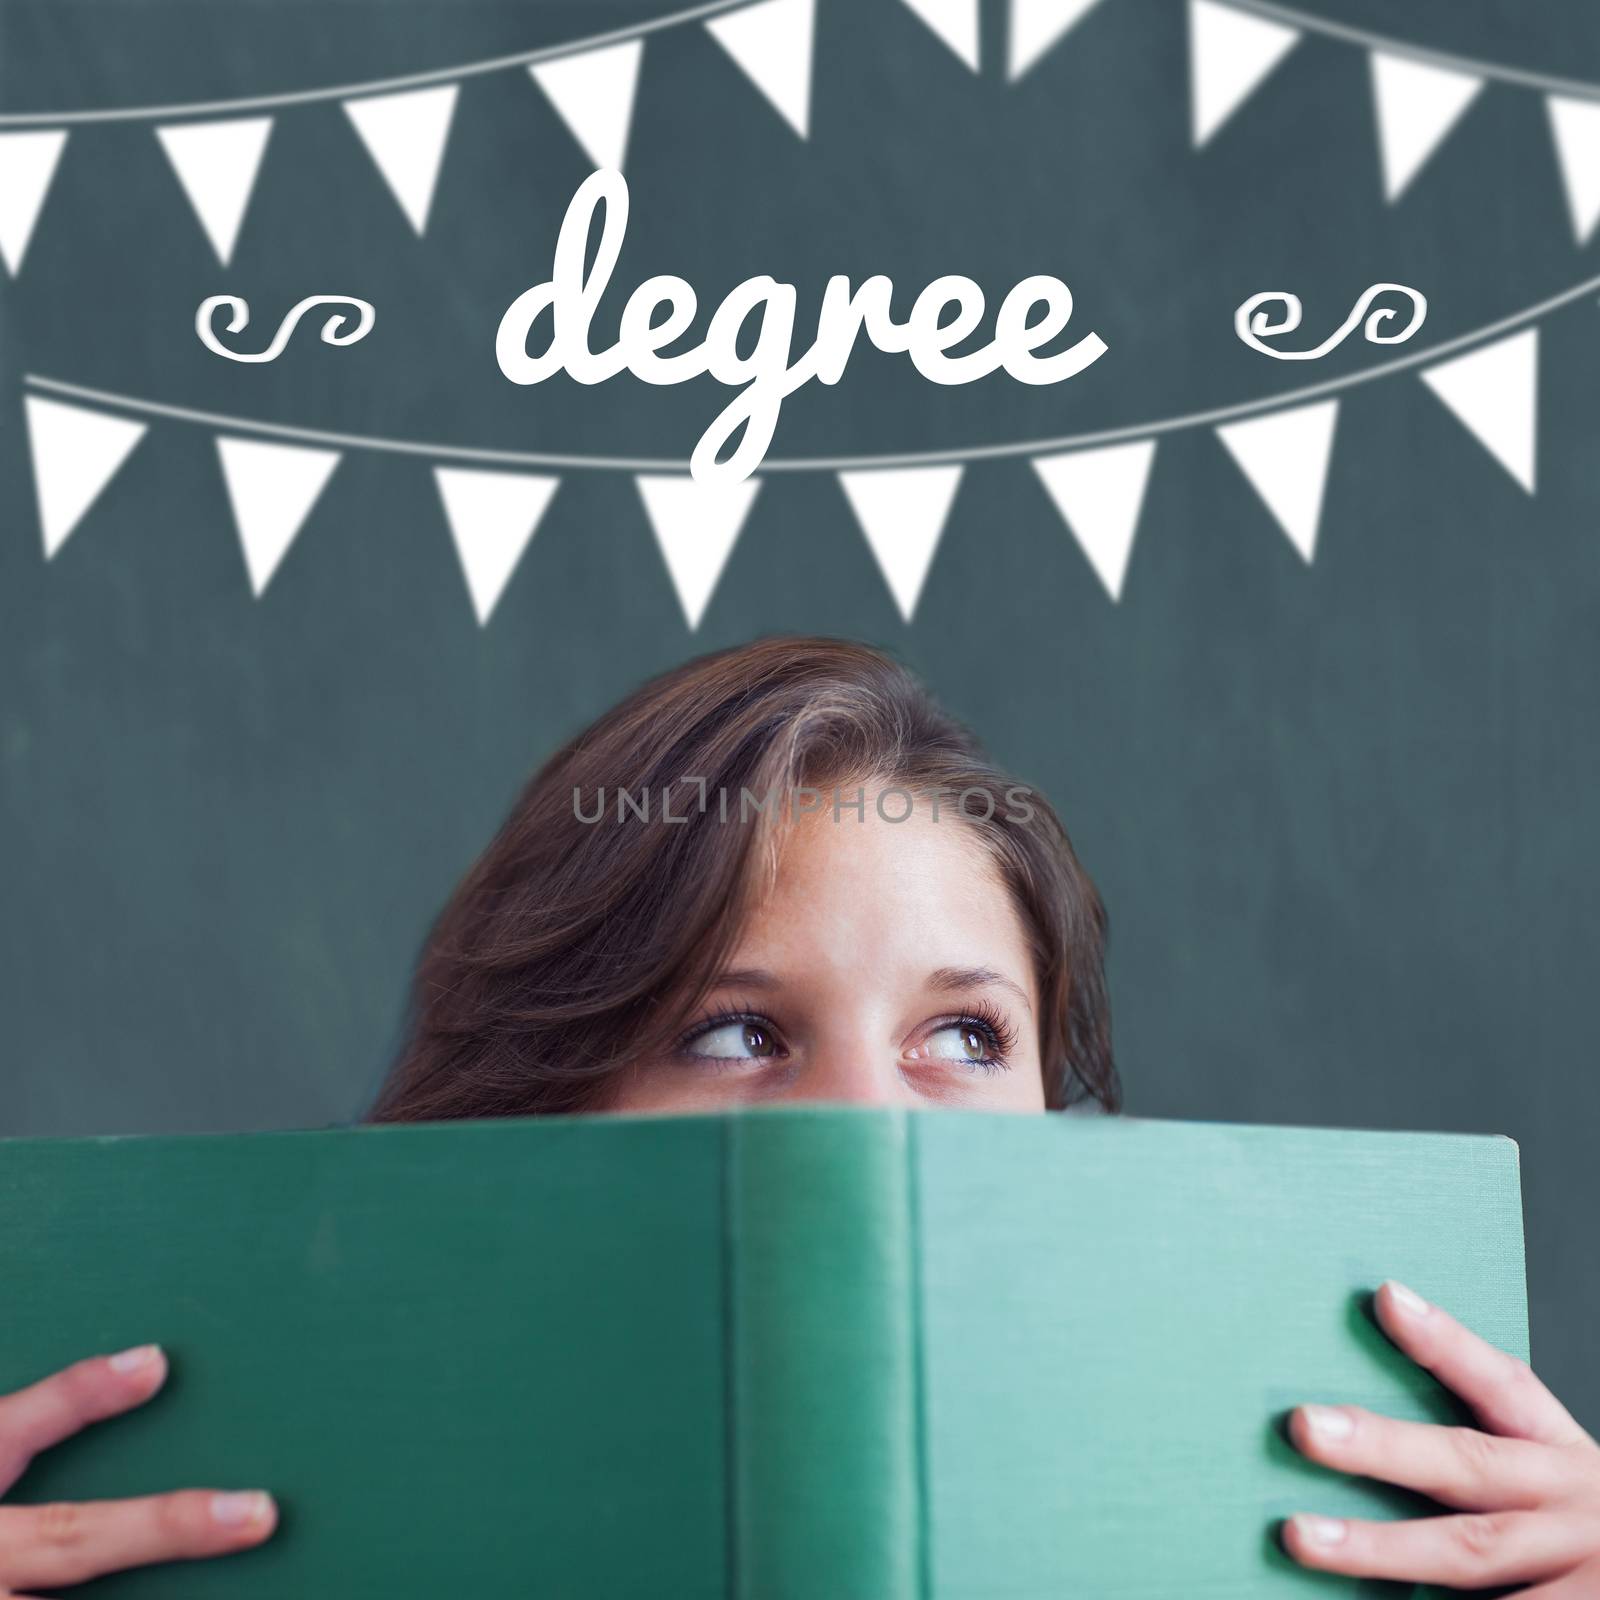 The word degree and bunting against student holding book